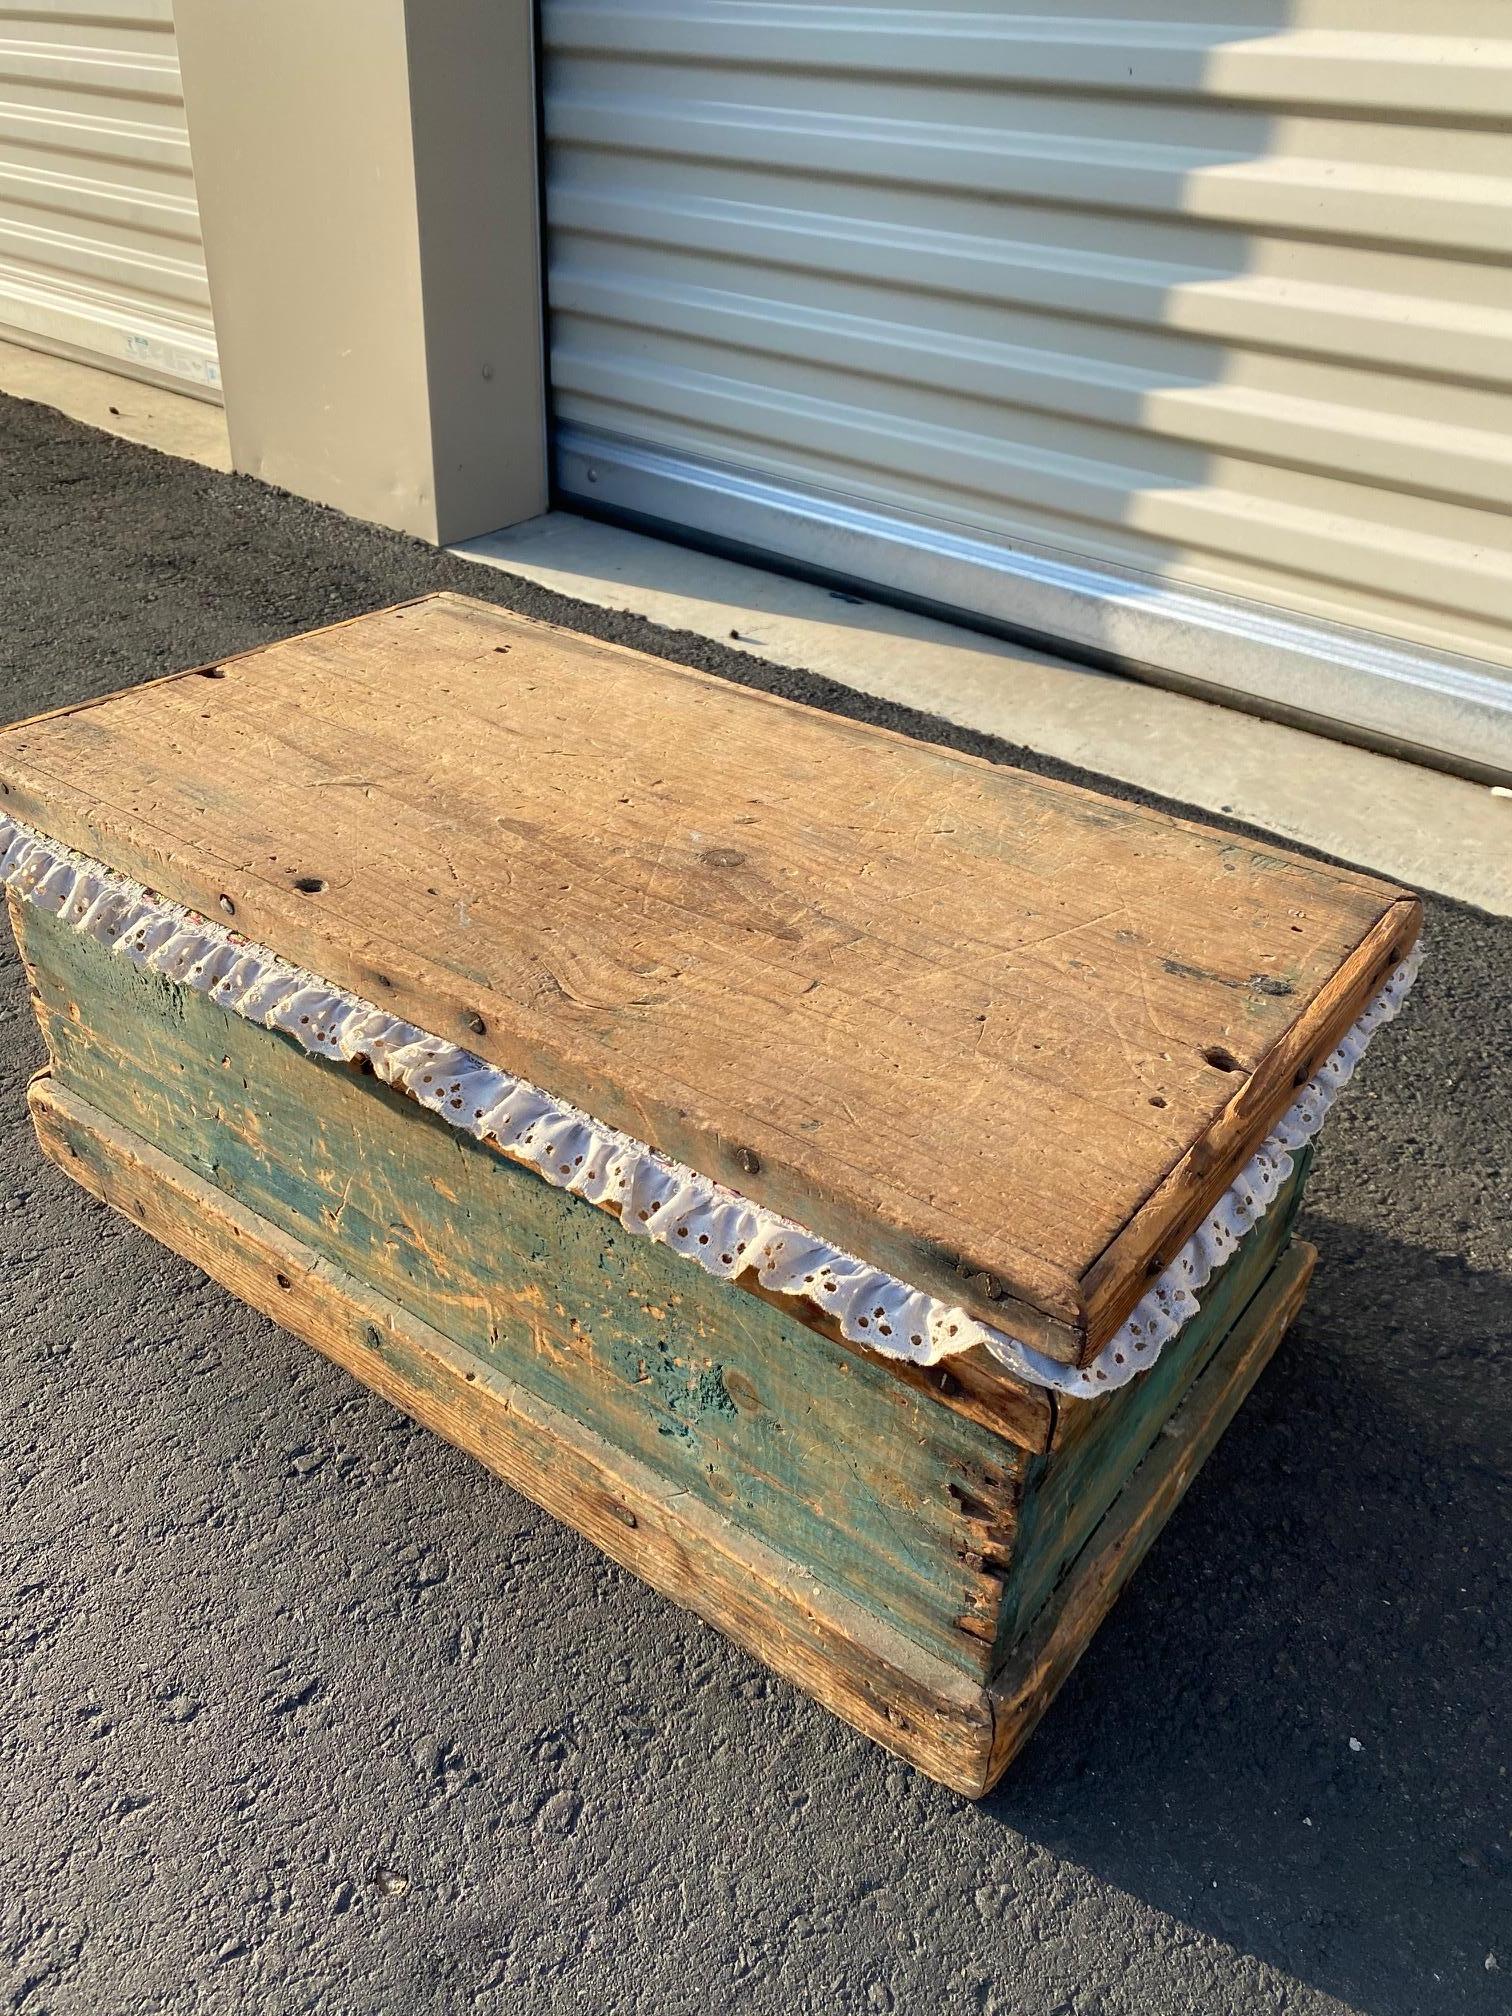 Cute vintage storage box. The distressed wood from it's age leaves a story to be imagined! This would make the perfect accent piece in your home. The lace trim is simply adorable and nice added feature!